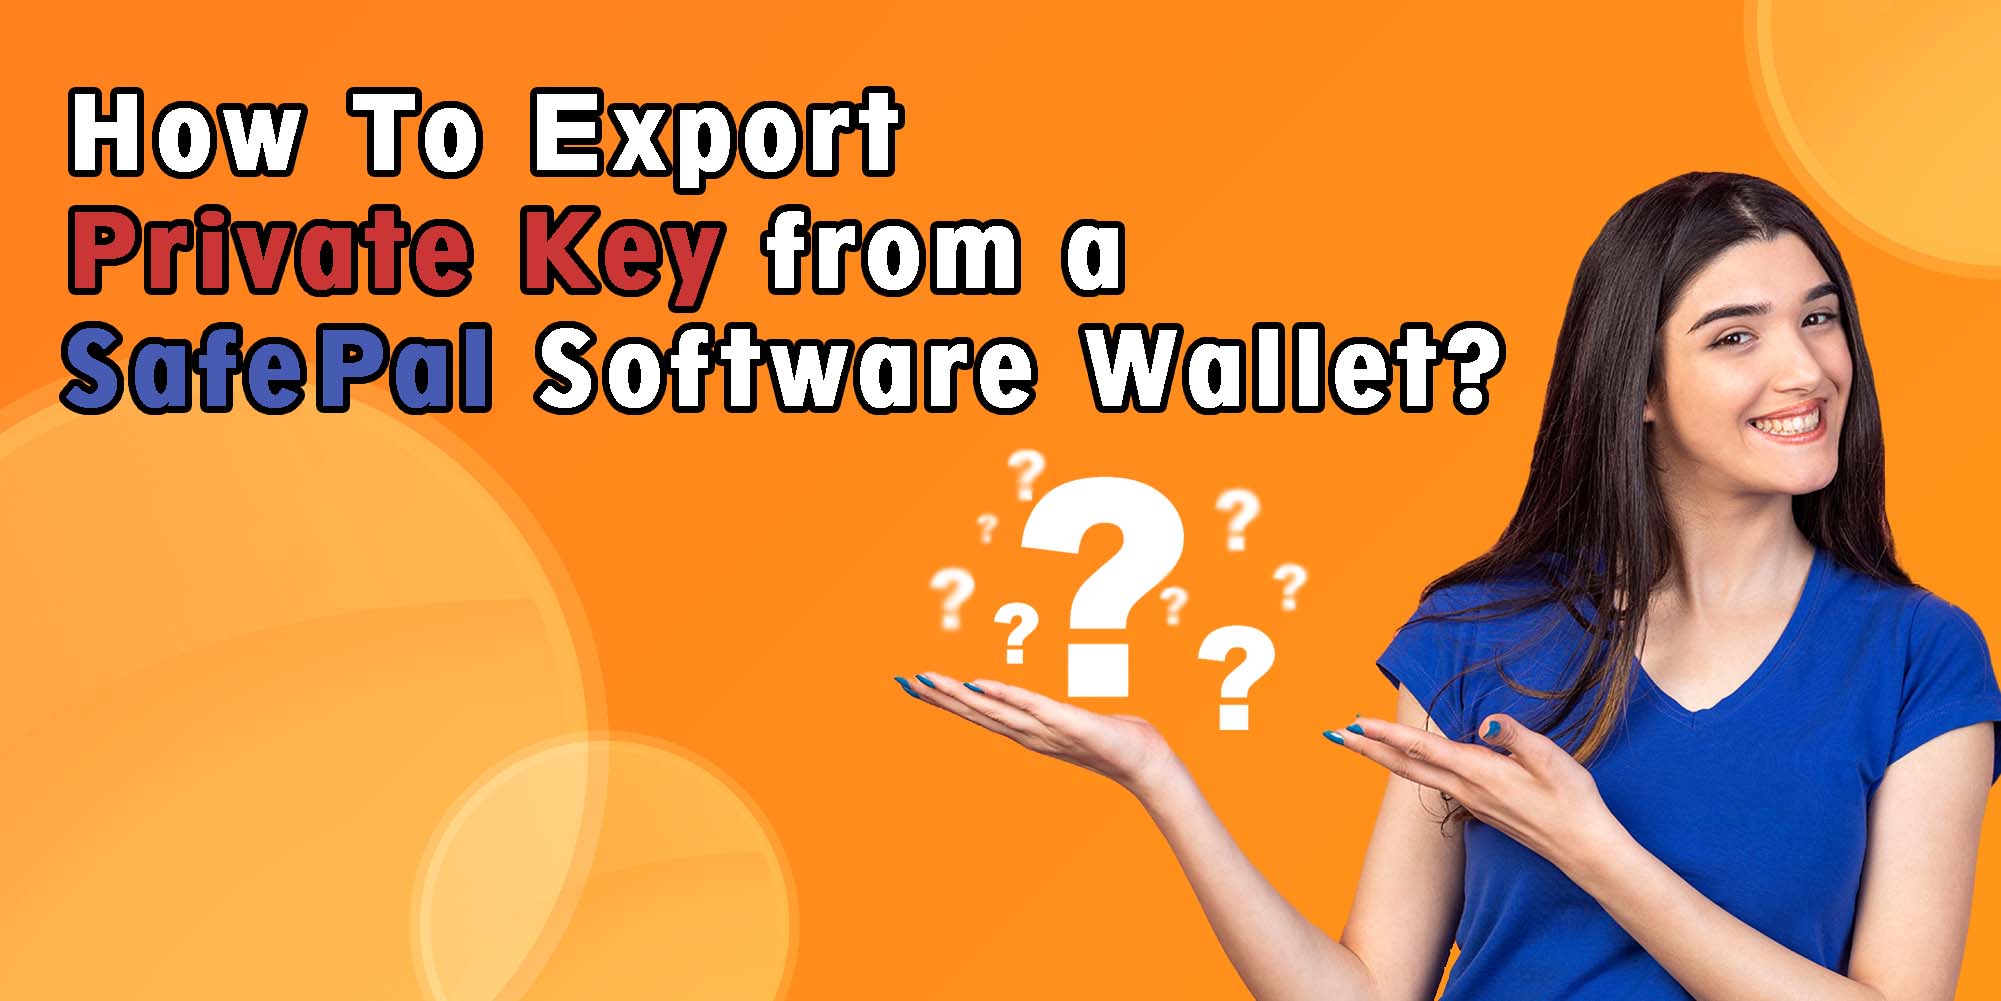 Export Private Key from SafePal Wallet